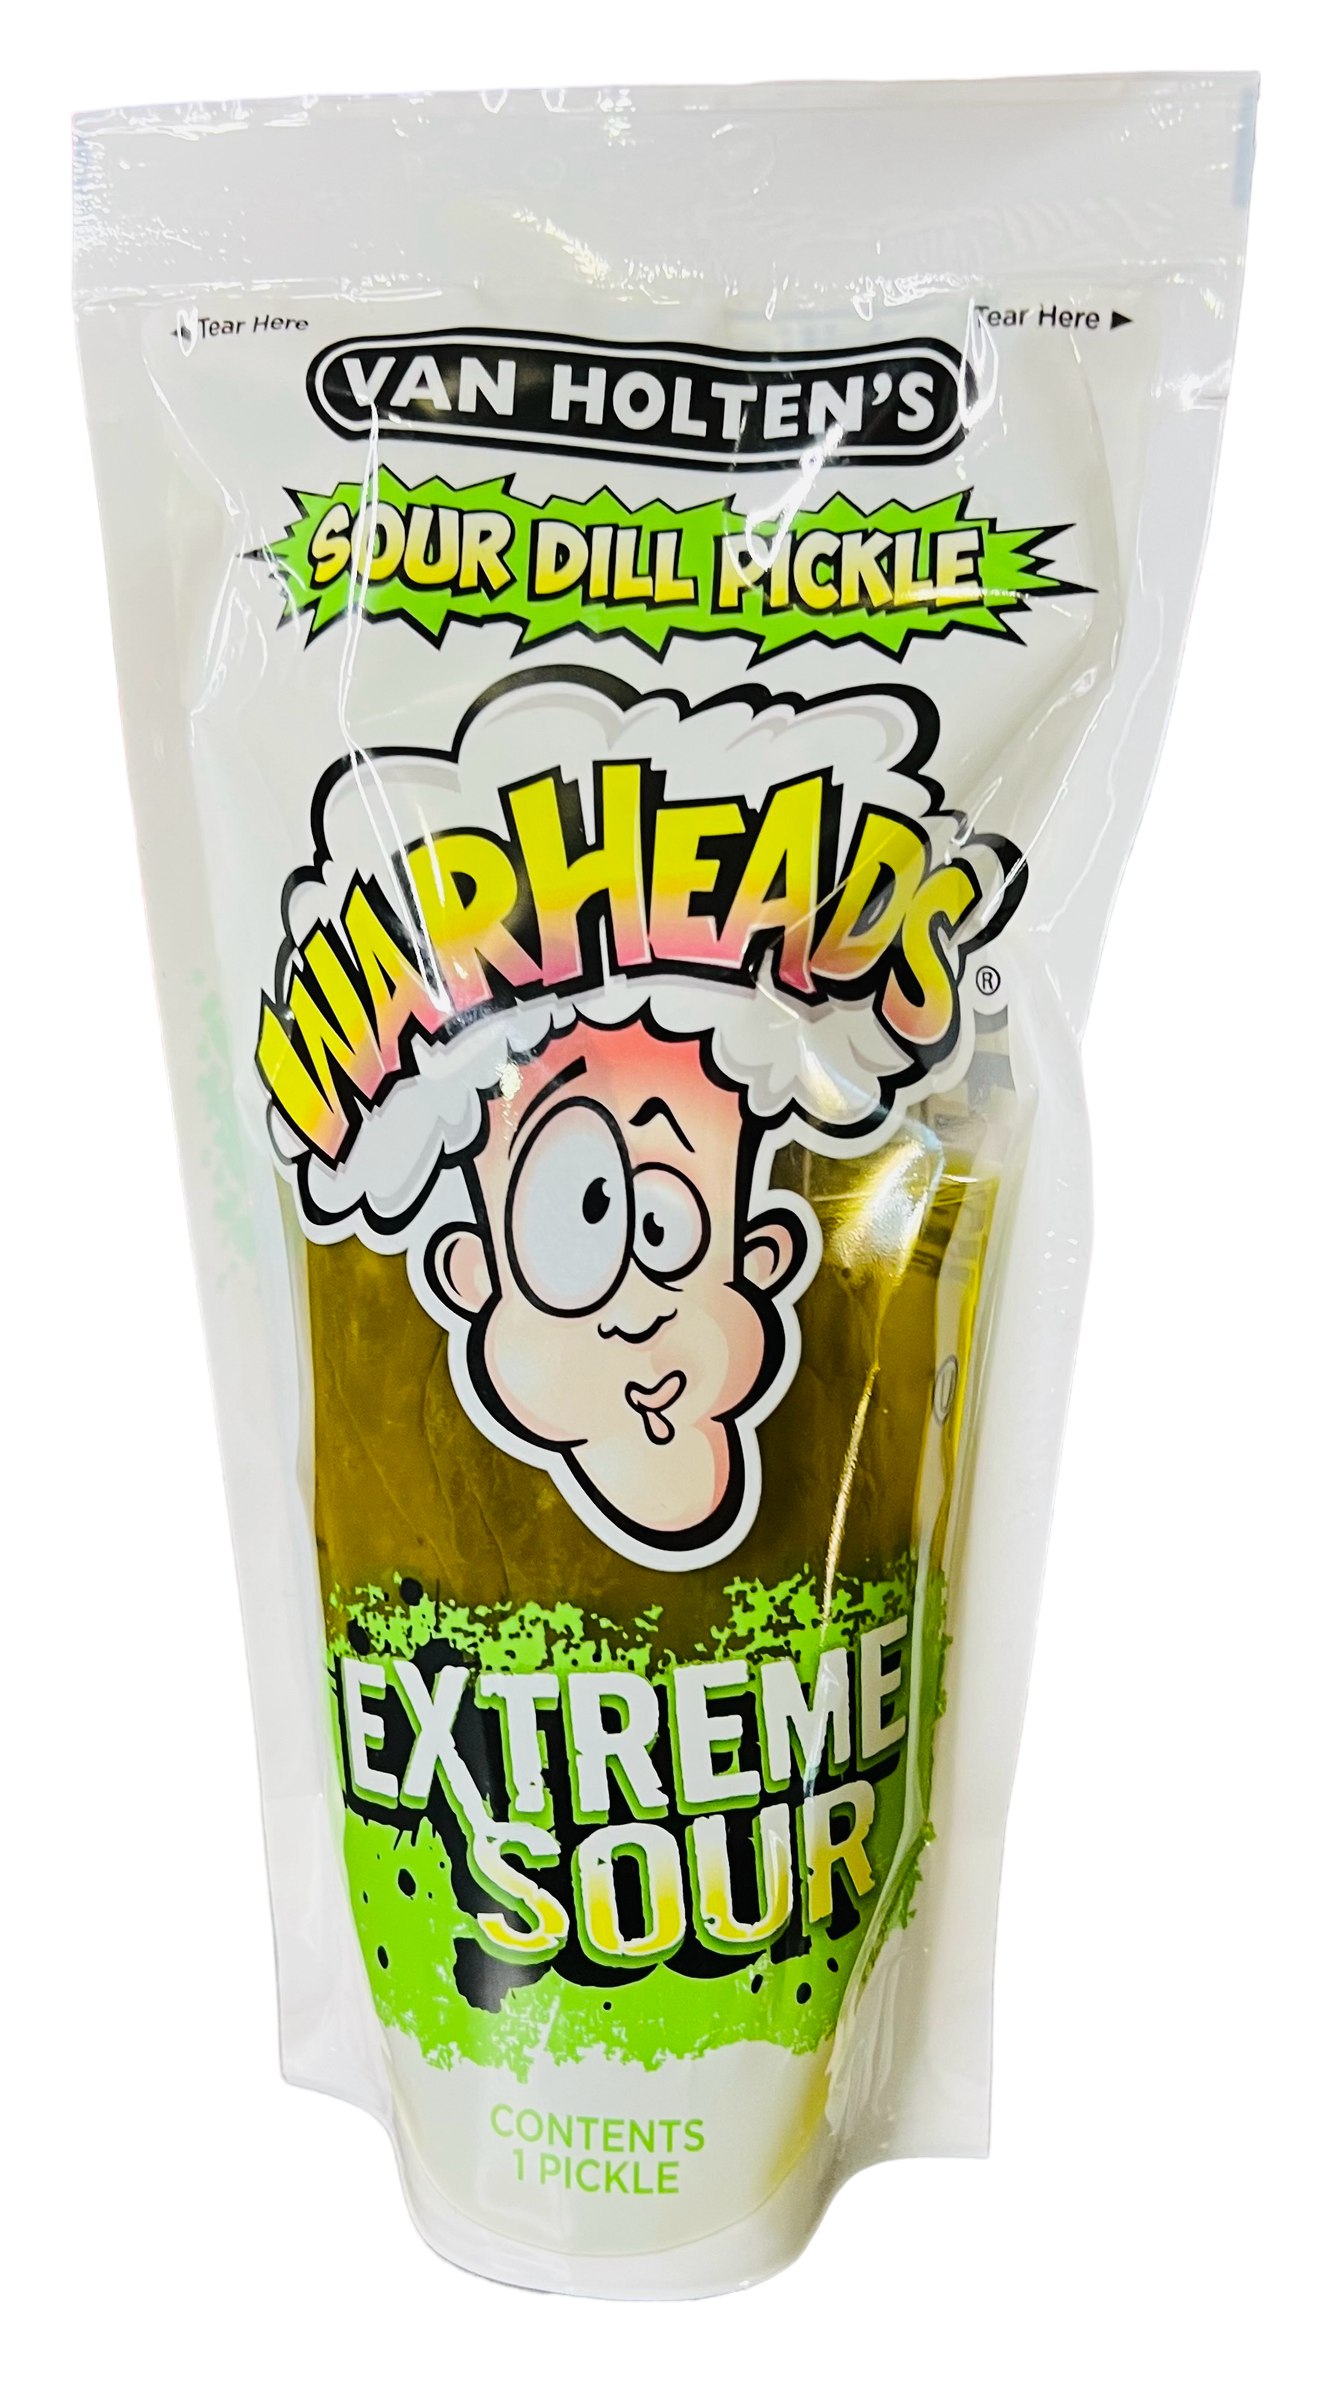 Van Holtens Warheads Extreme Sour Dill Pickle (28g)